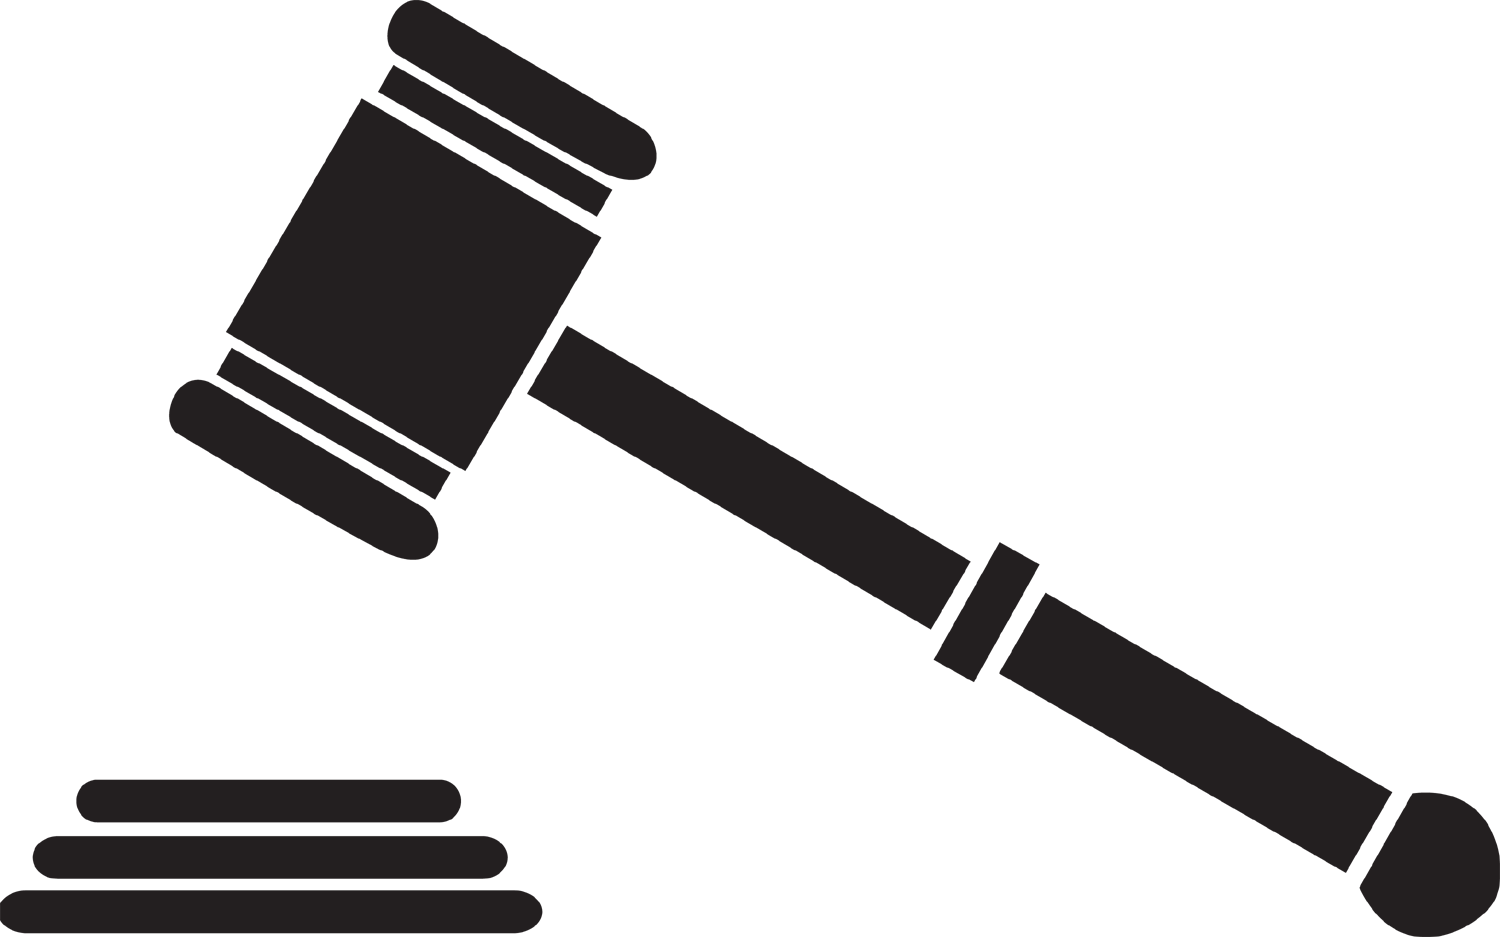 Free Gavel Cliparts, Download Free Clip Art, Free Clip Art